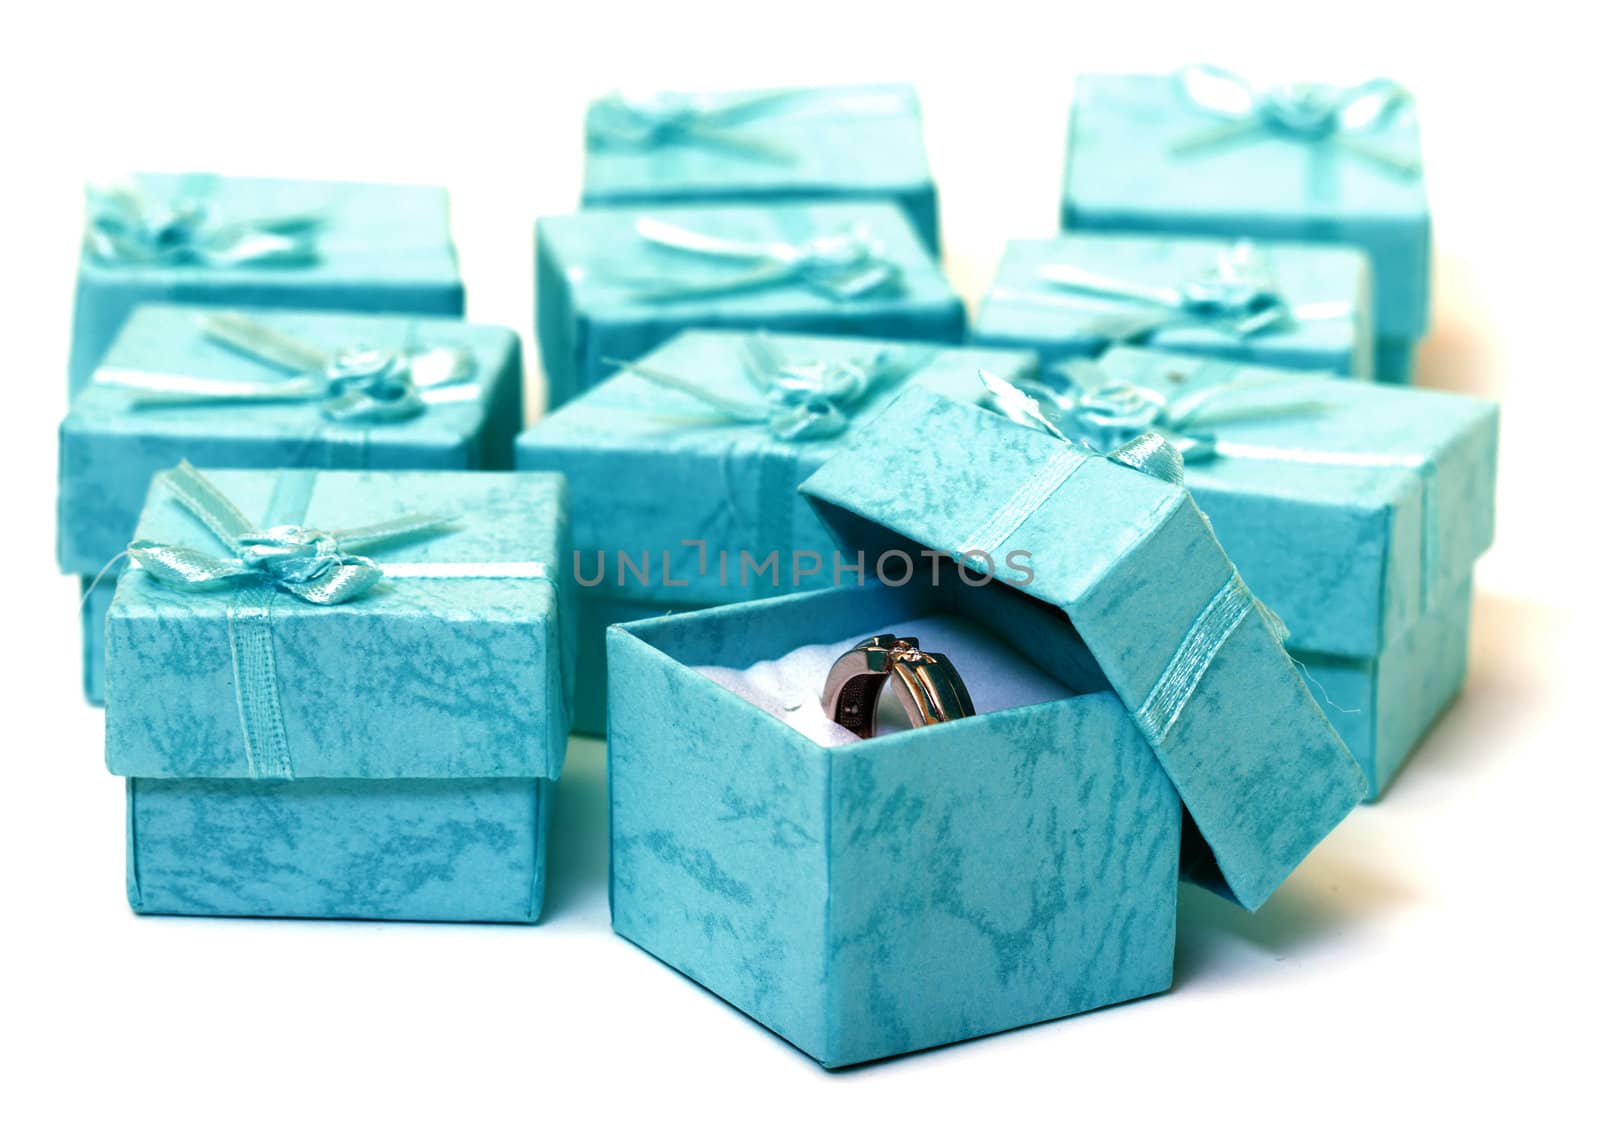 Cyan gift boxes with ring closeup on white background